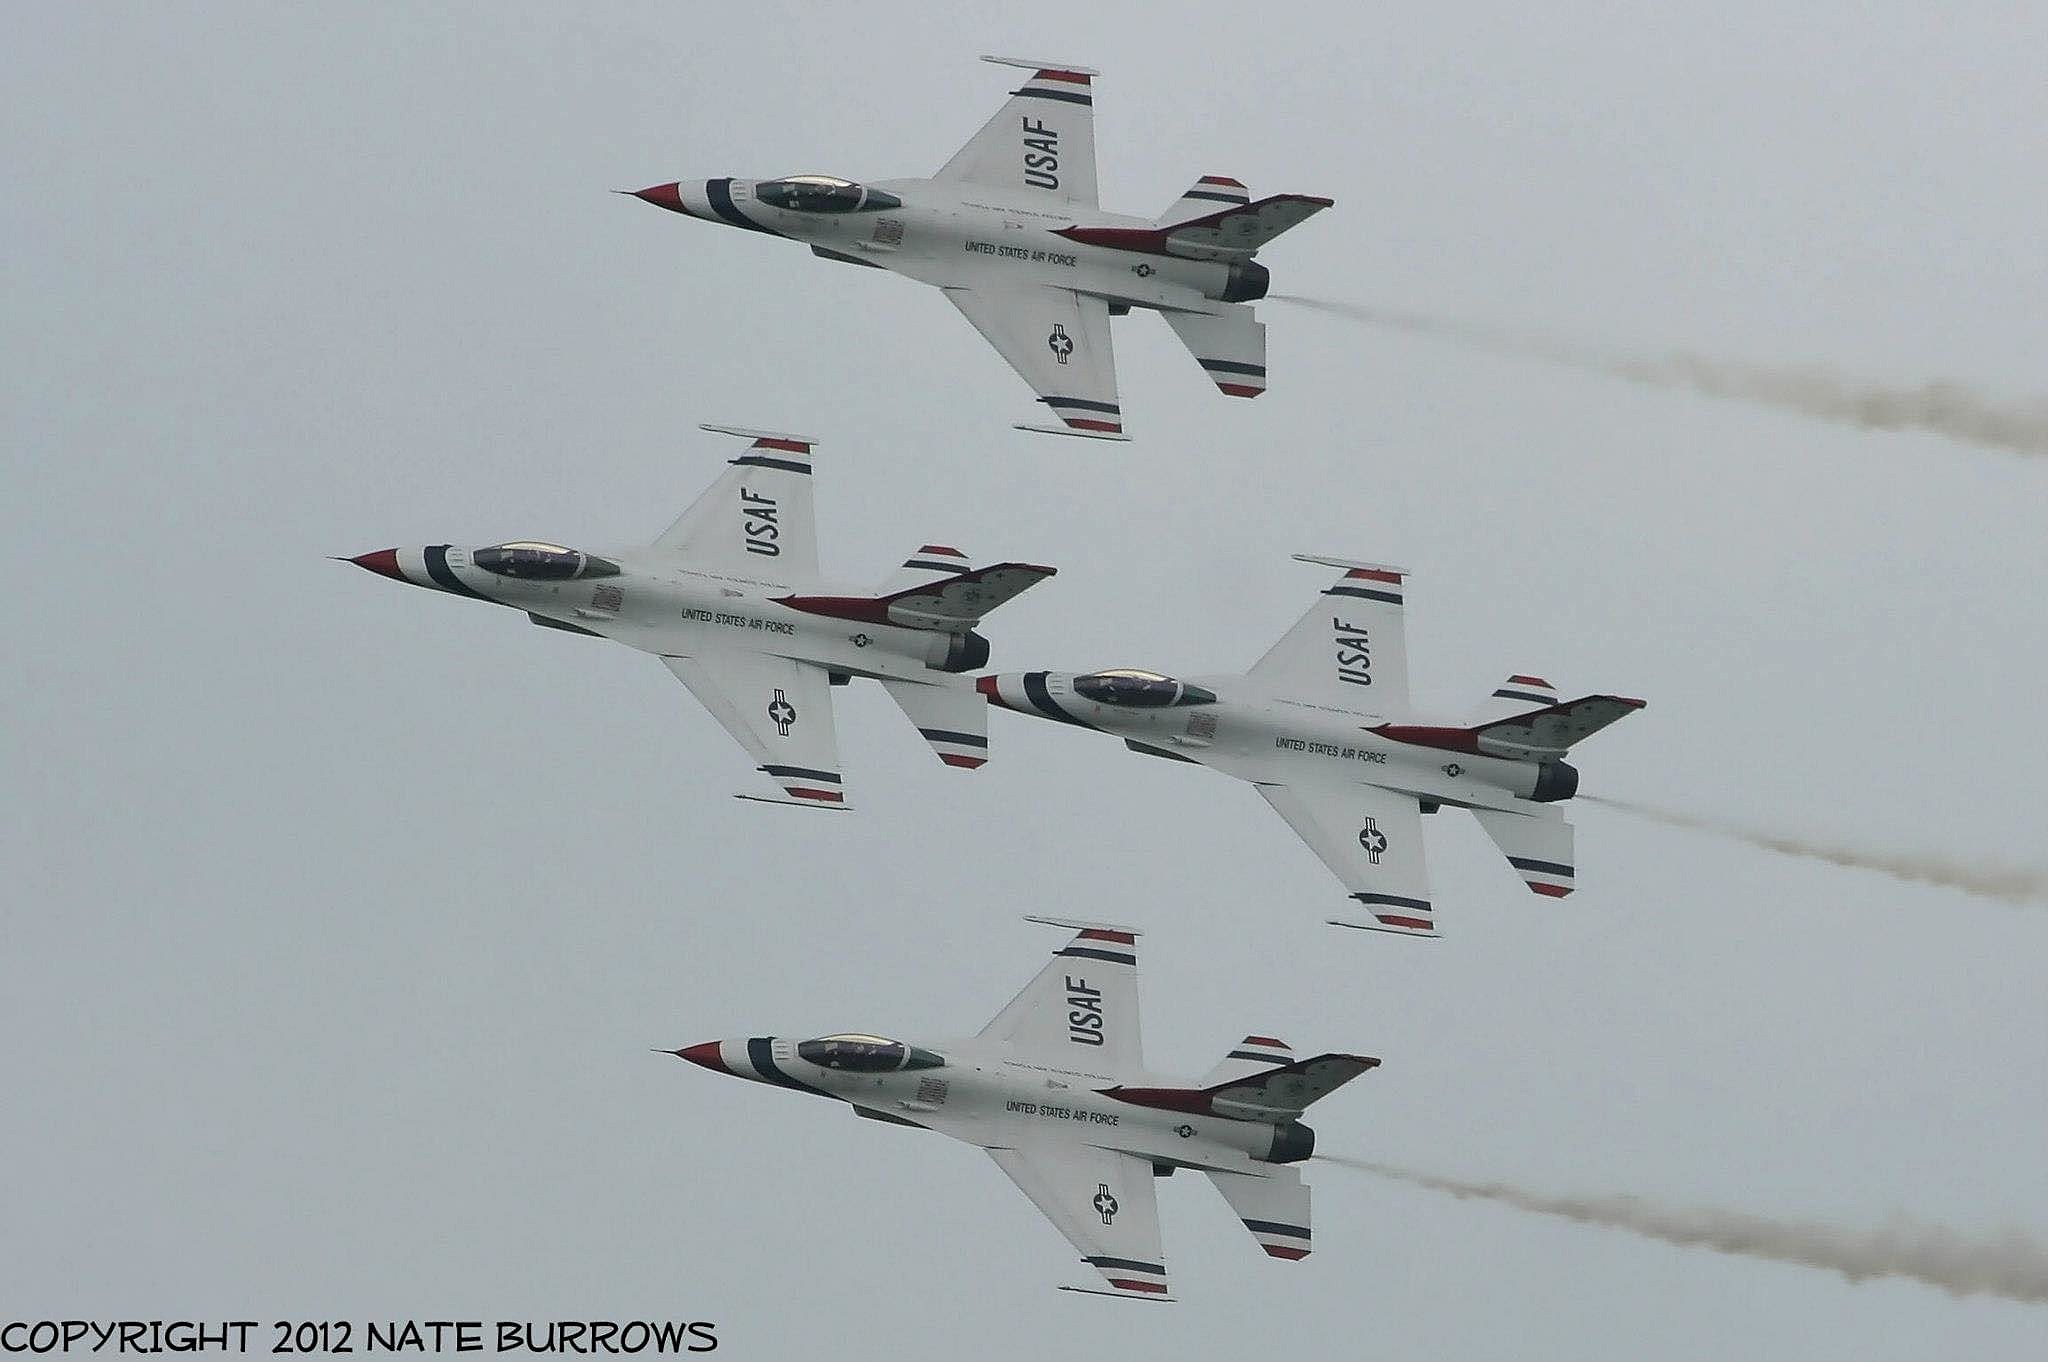 Is The Quad City Air Show Coming Back? Thunderbirds Announce 2023